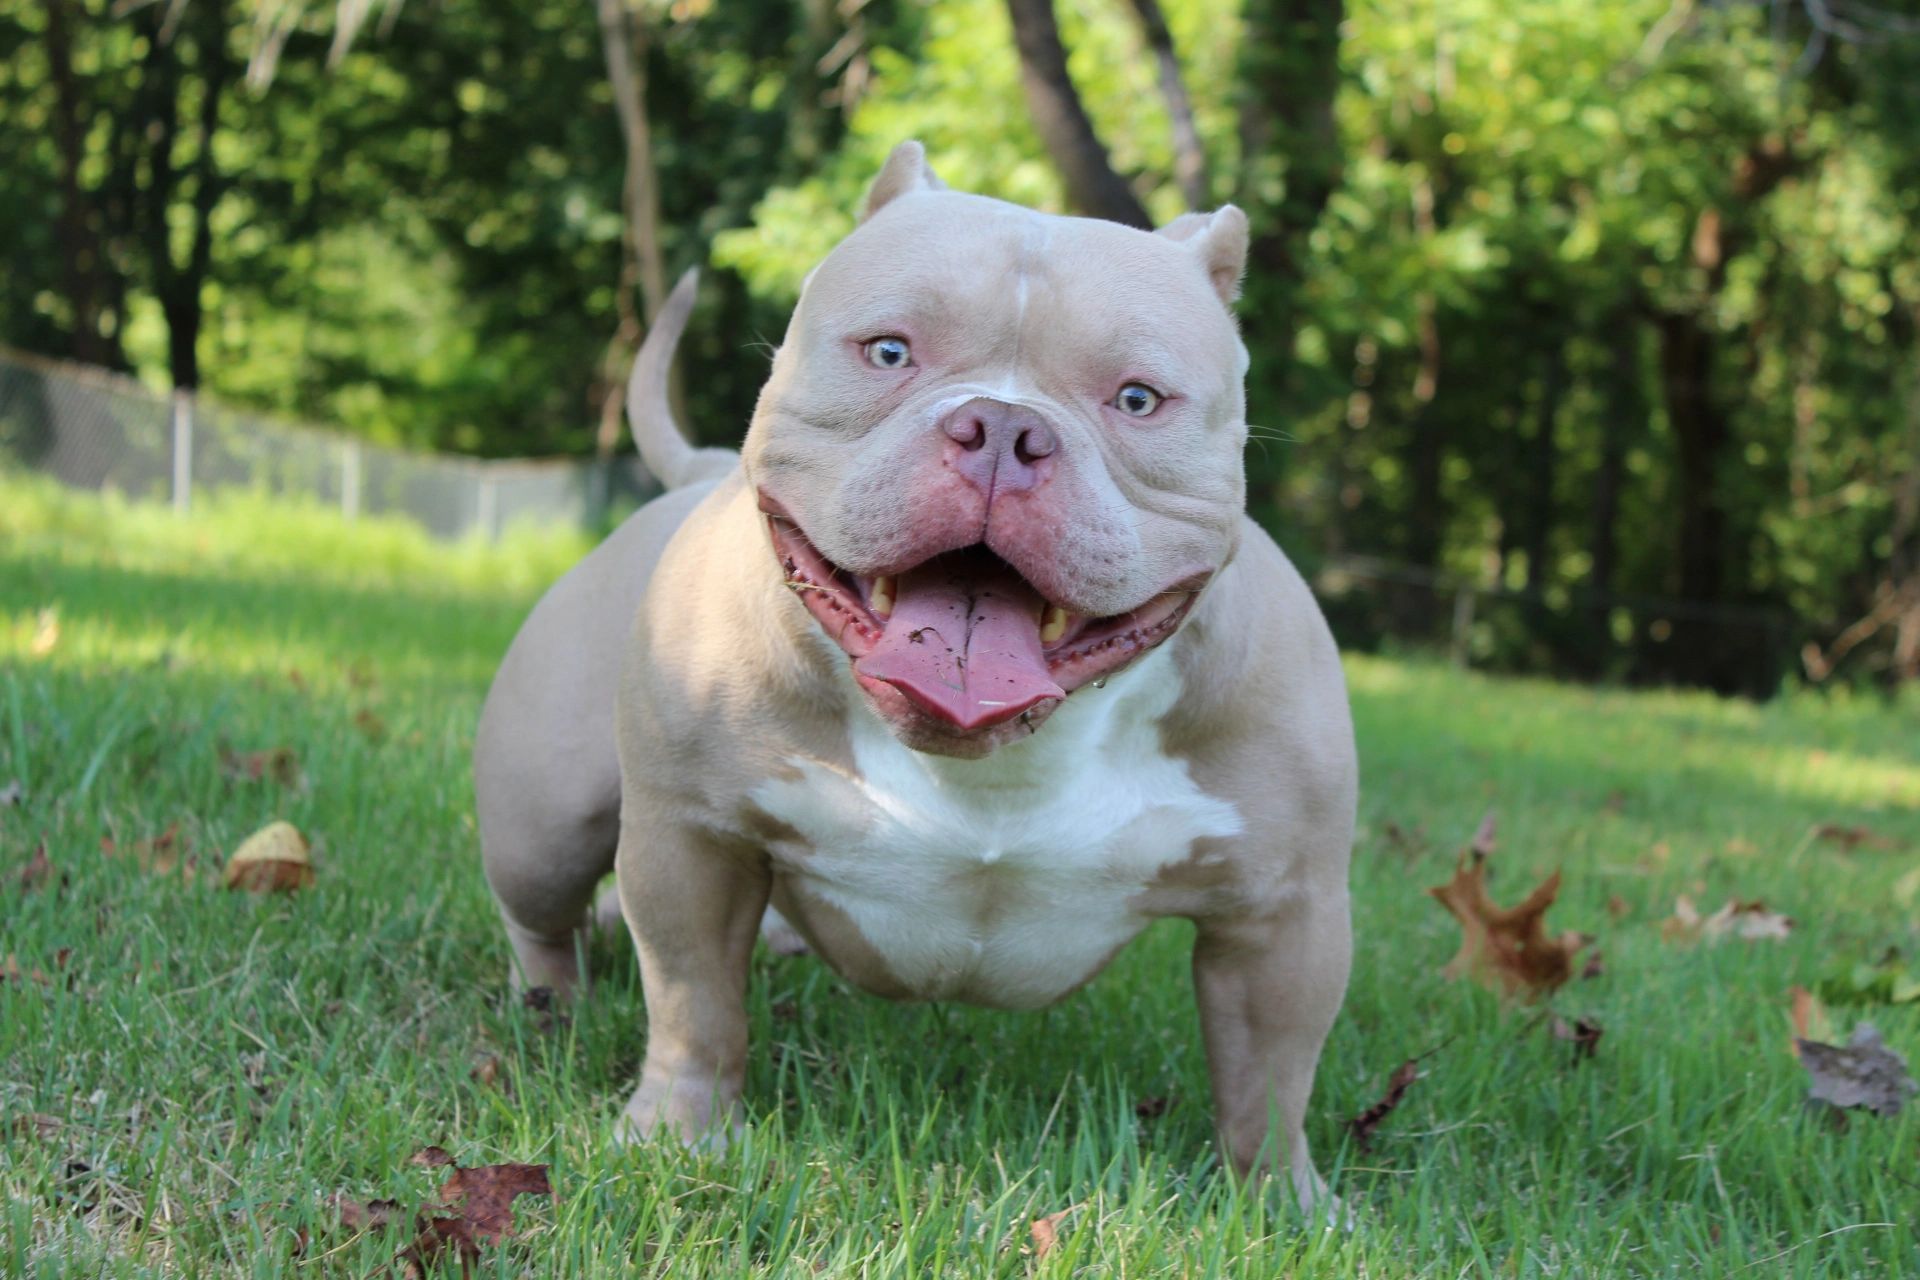 bully puppies for sale Off 51 Micro american bully dog Images, Stock WHAT I...